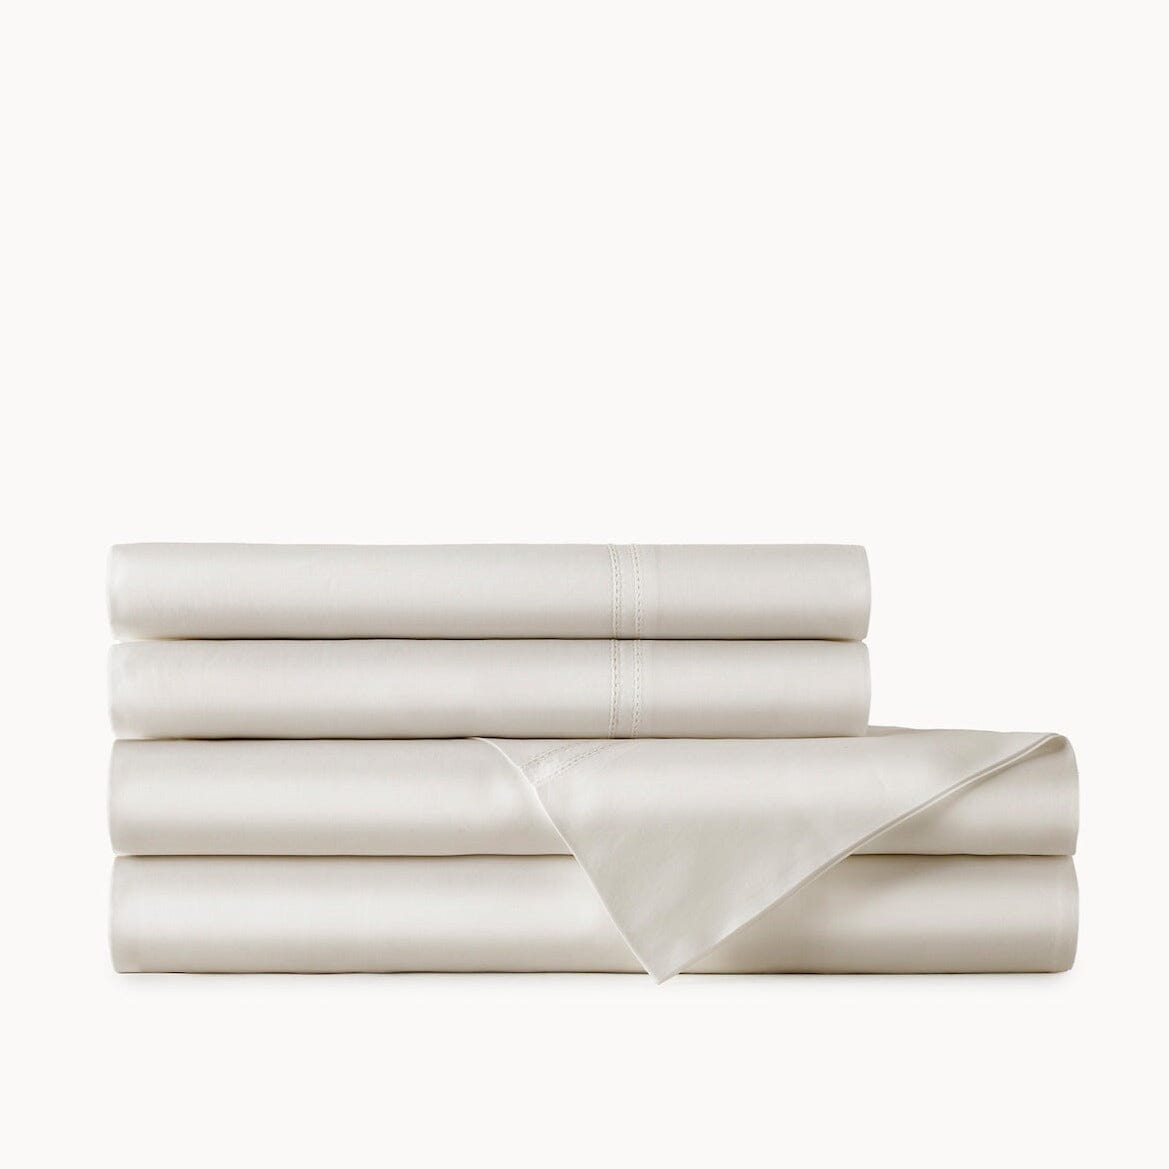 Cotton Sheets - Peacock Alley Percale Cotton Bedding | Lyric Platinum at Fig Linens and Home